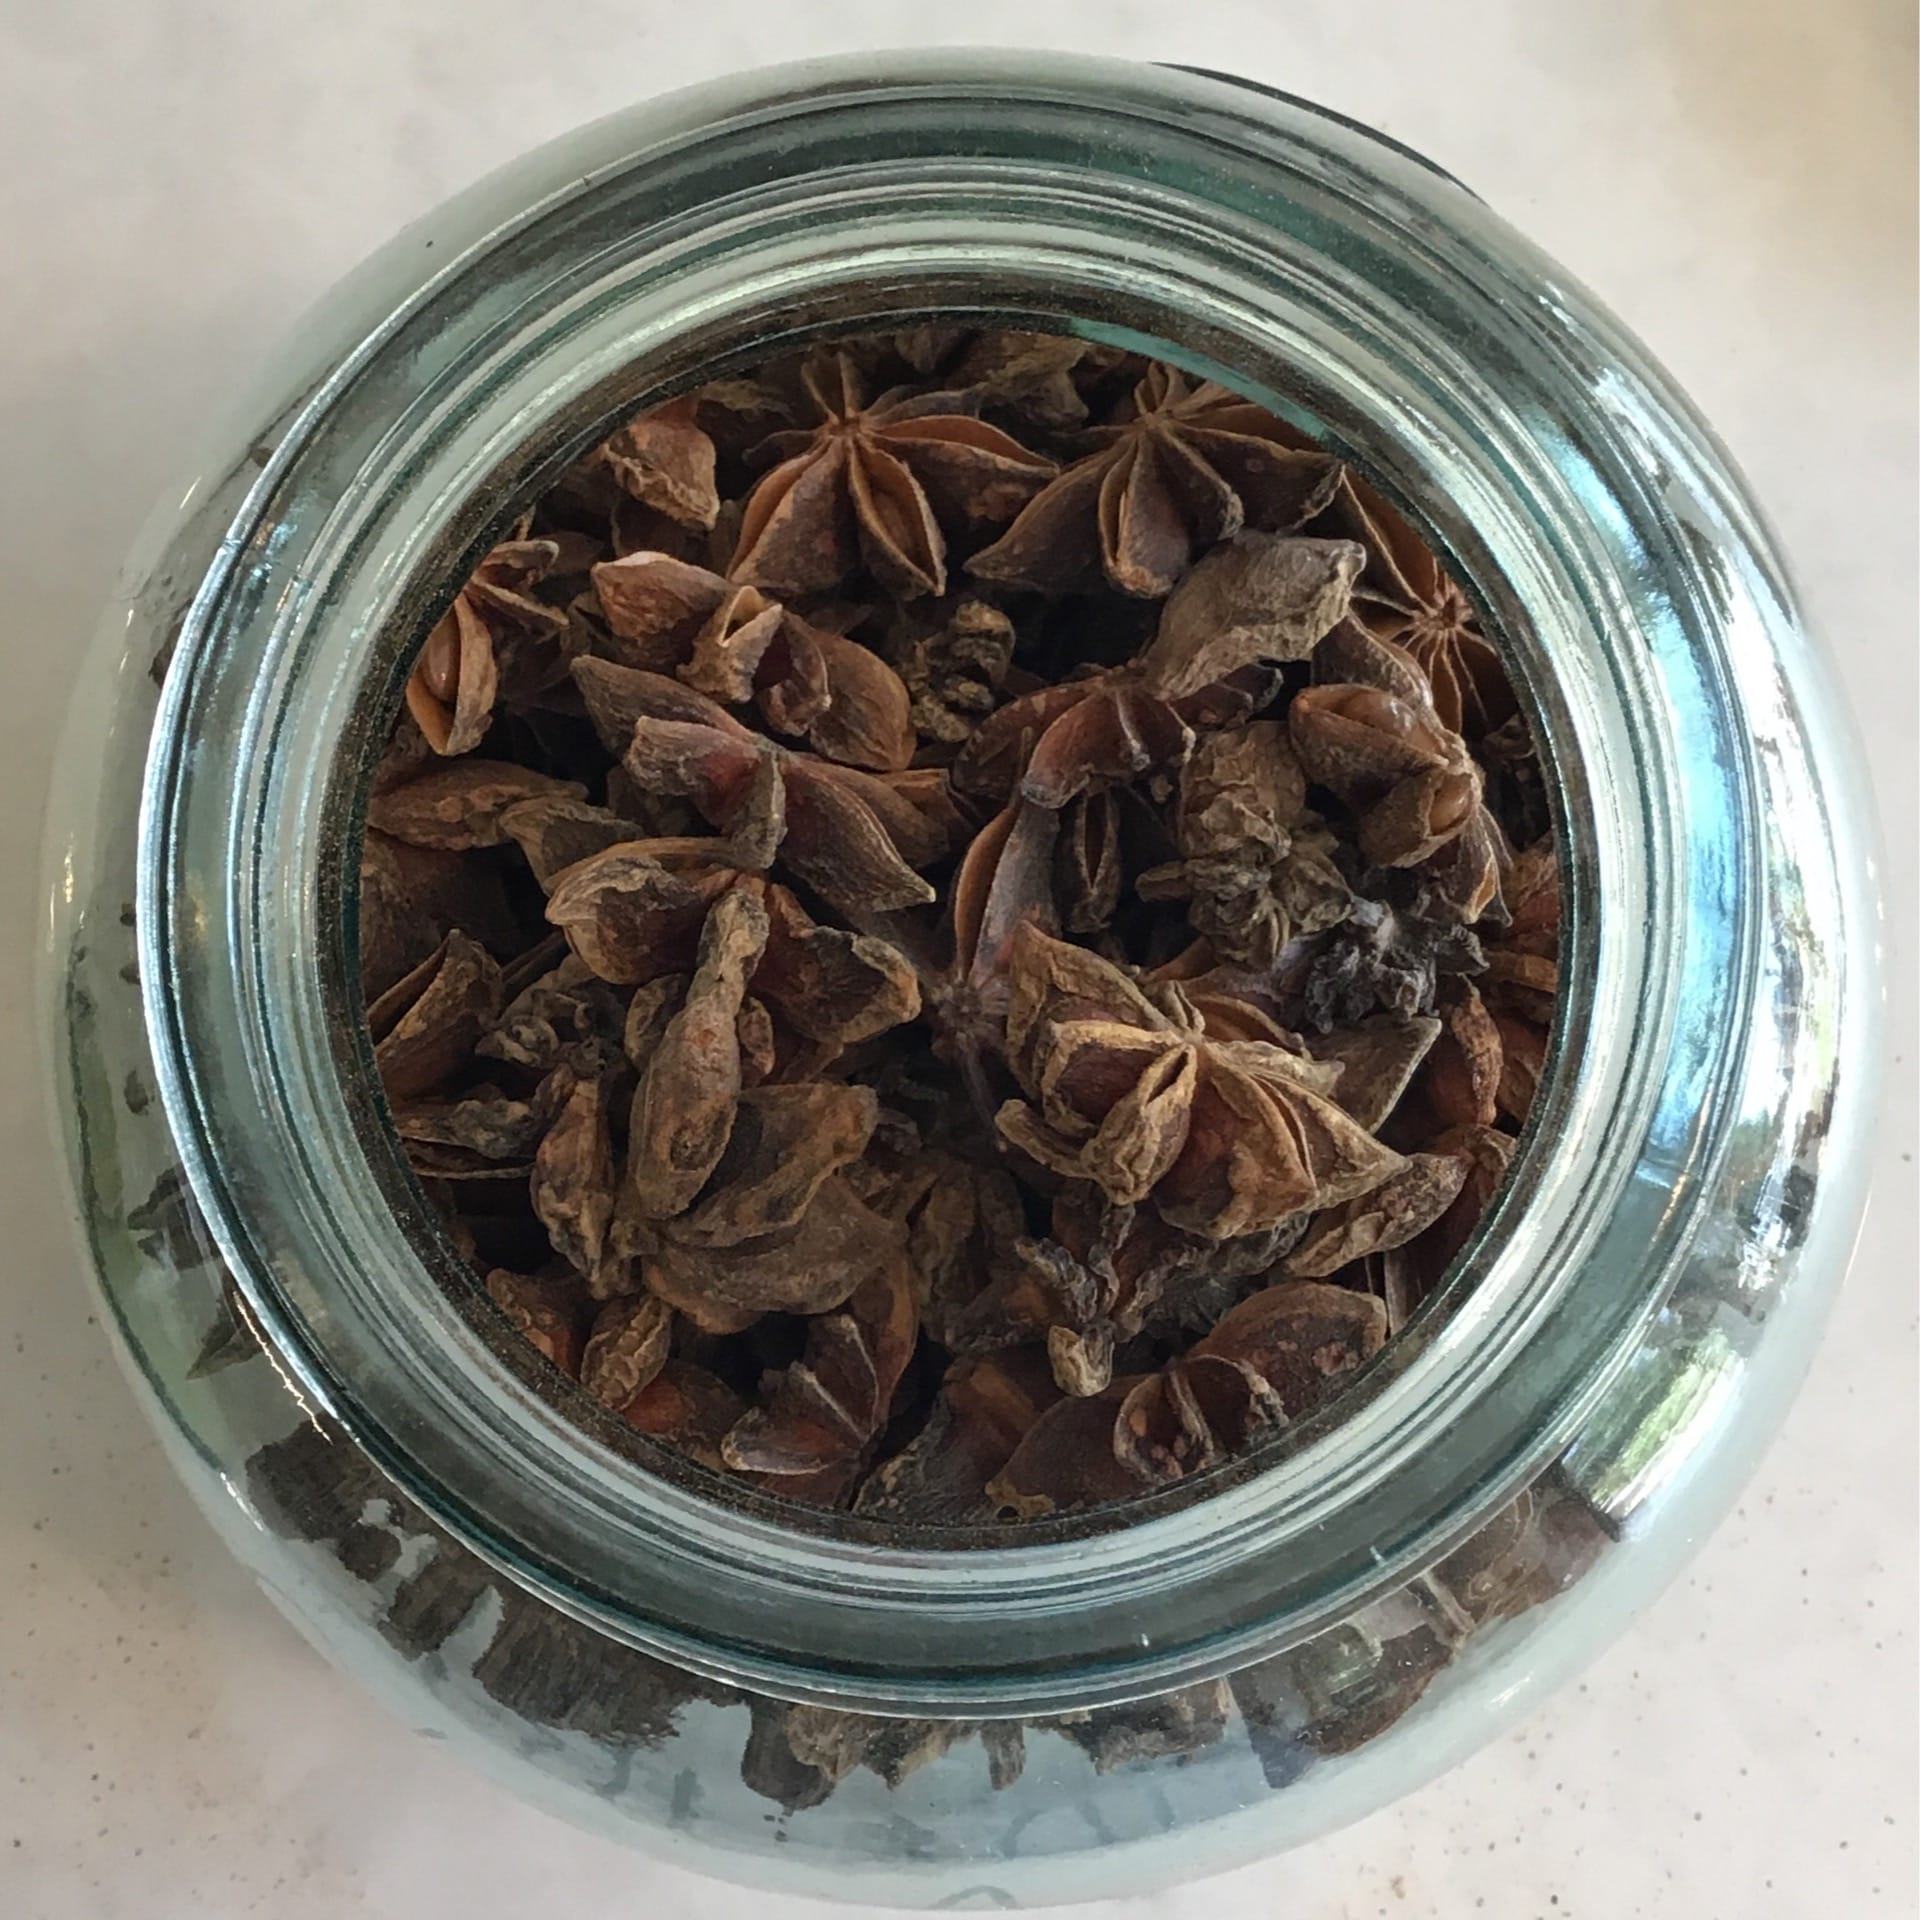 Whole star anise pods you can refill in your own container zero waste organic plant-based